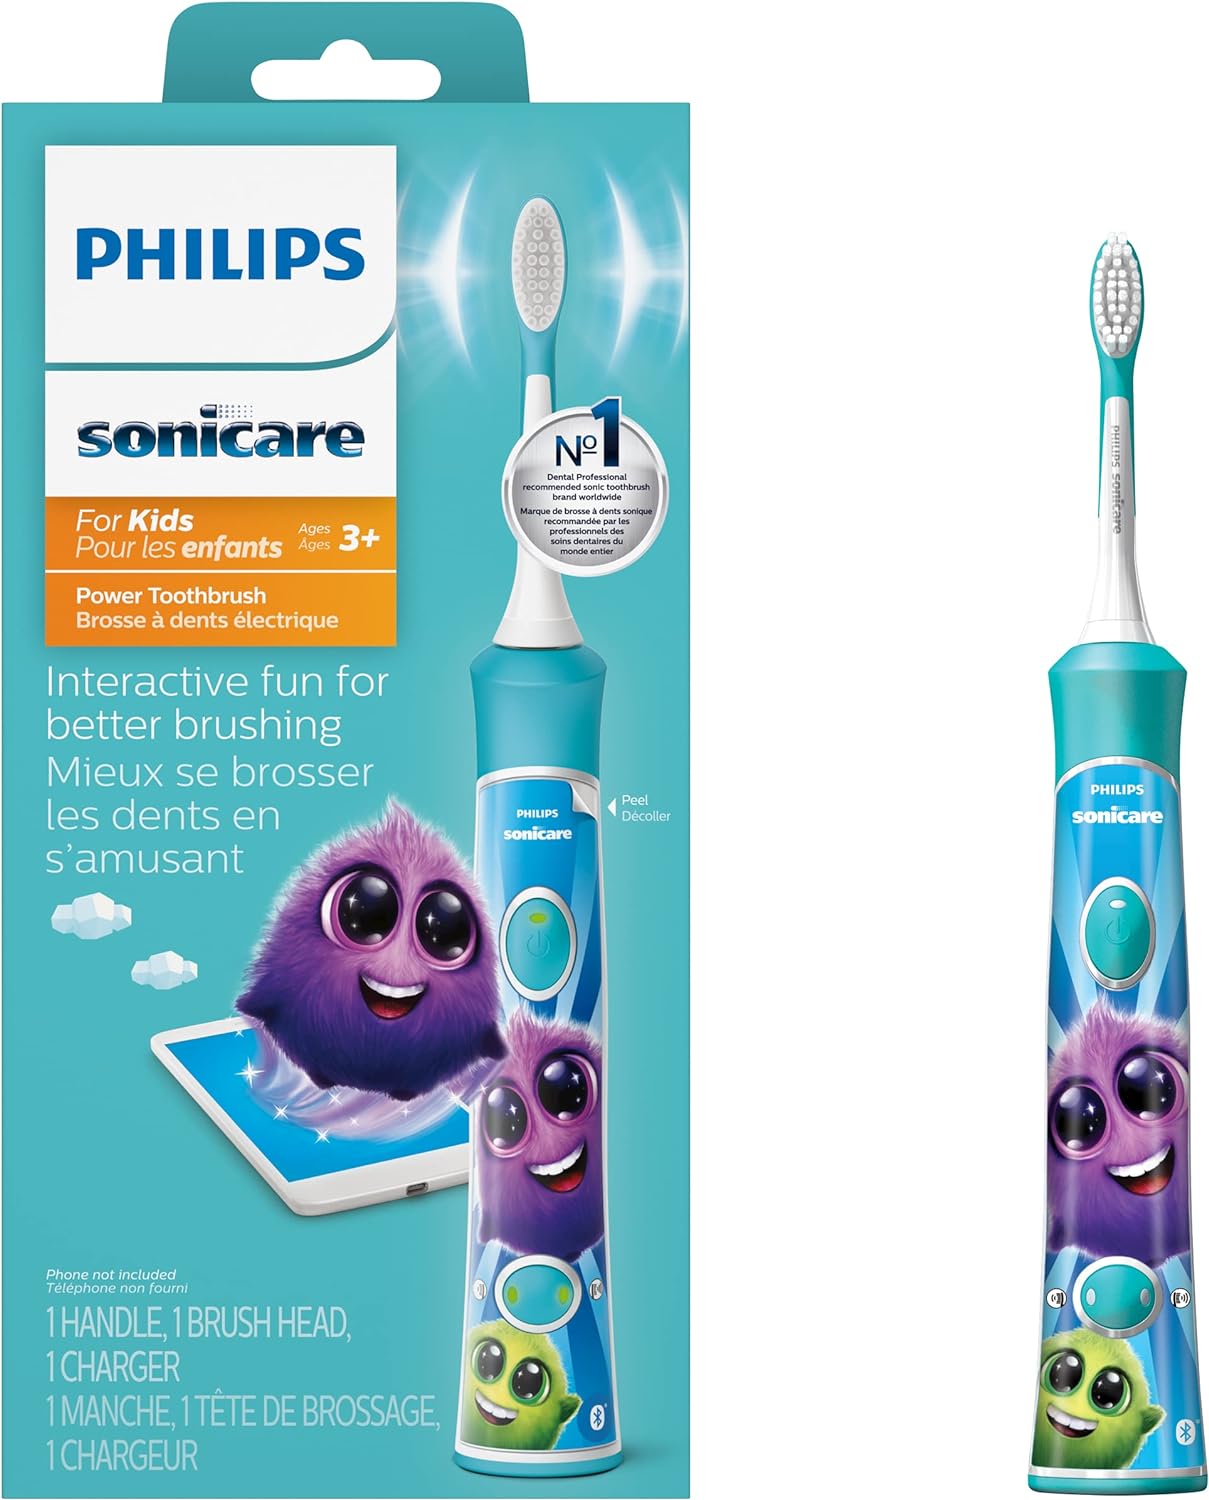 Philips Sonicare Kids' Connected Electric Toothbrush $20.97 + Free Shipping w/ Prime